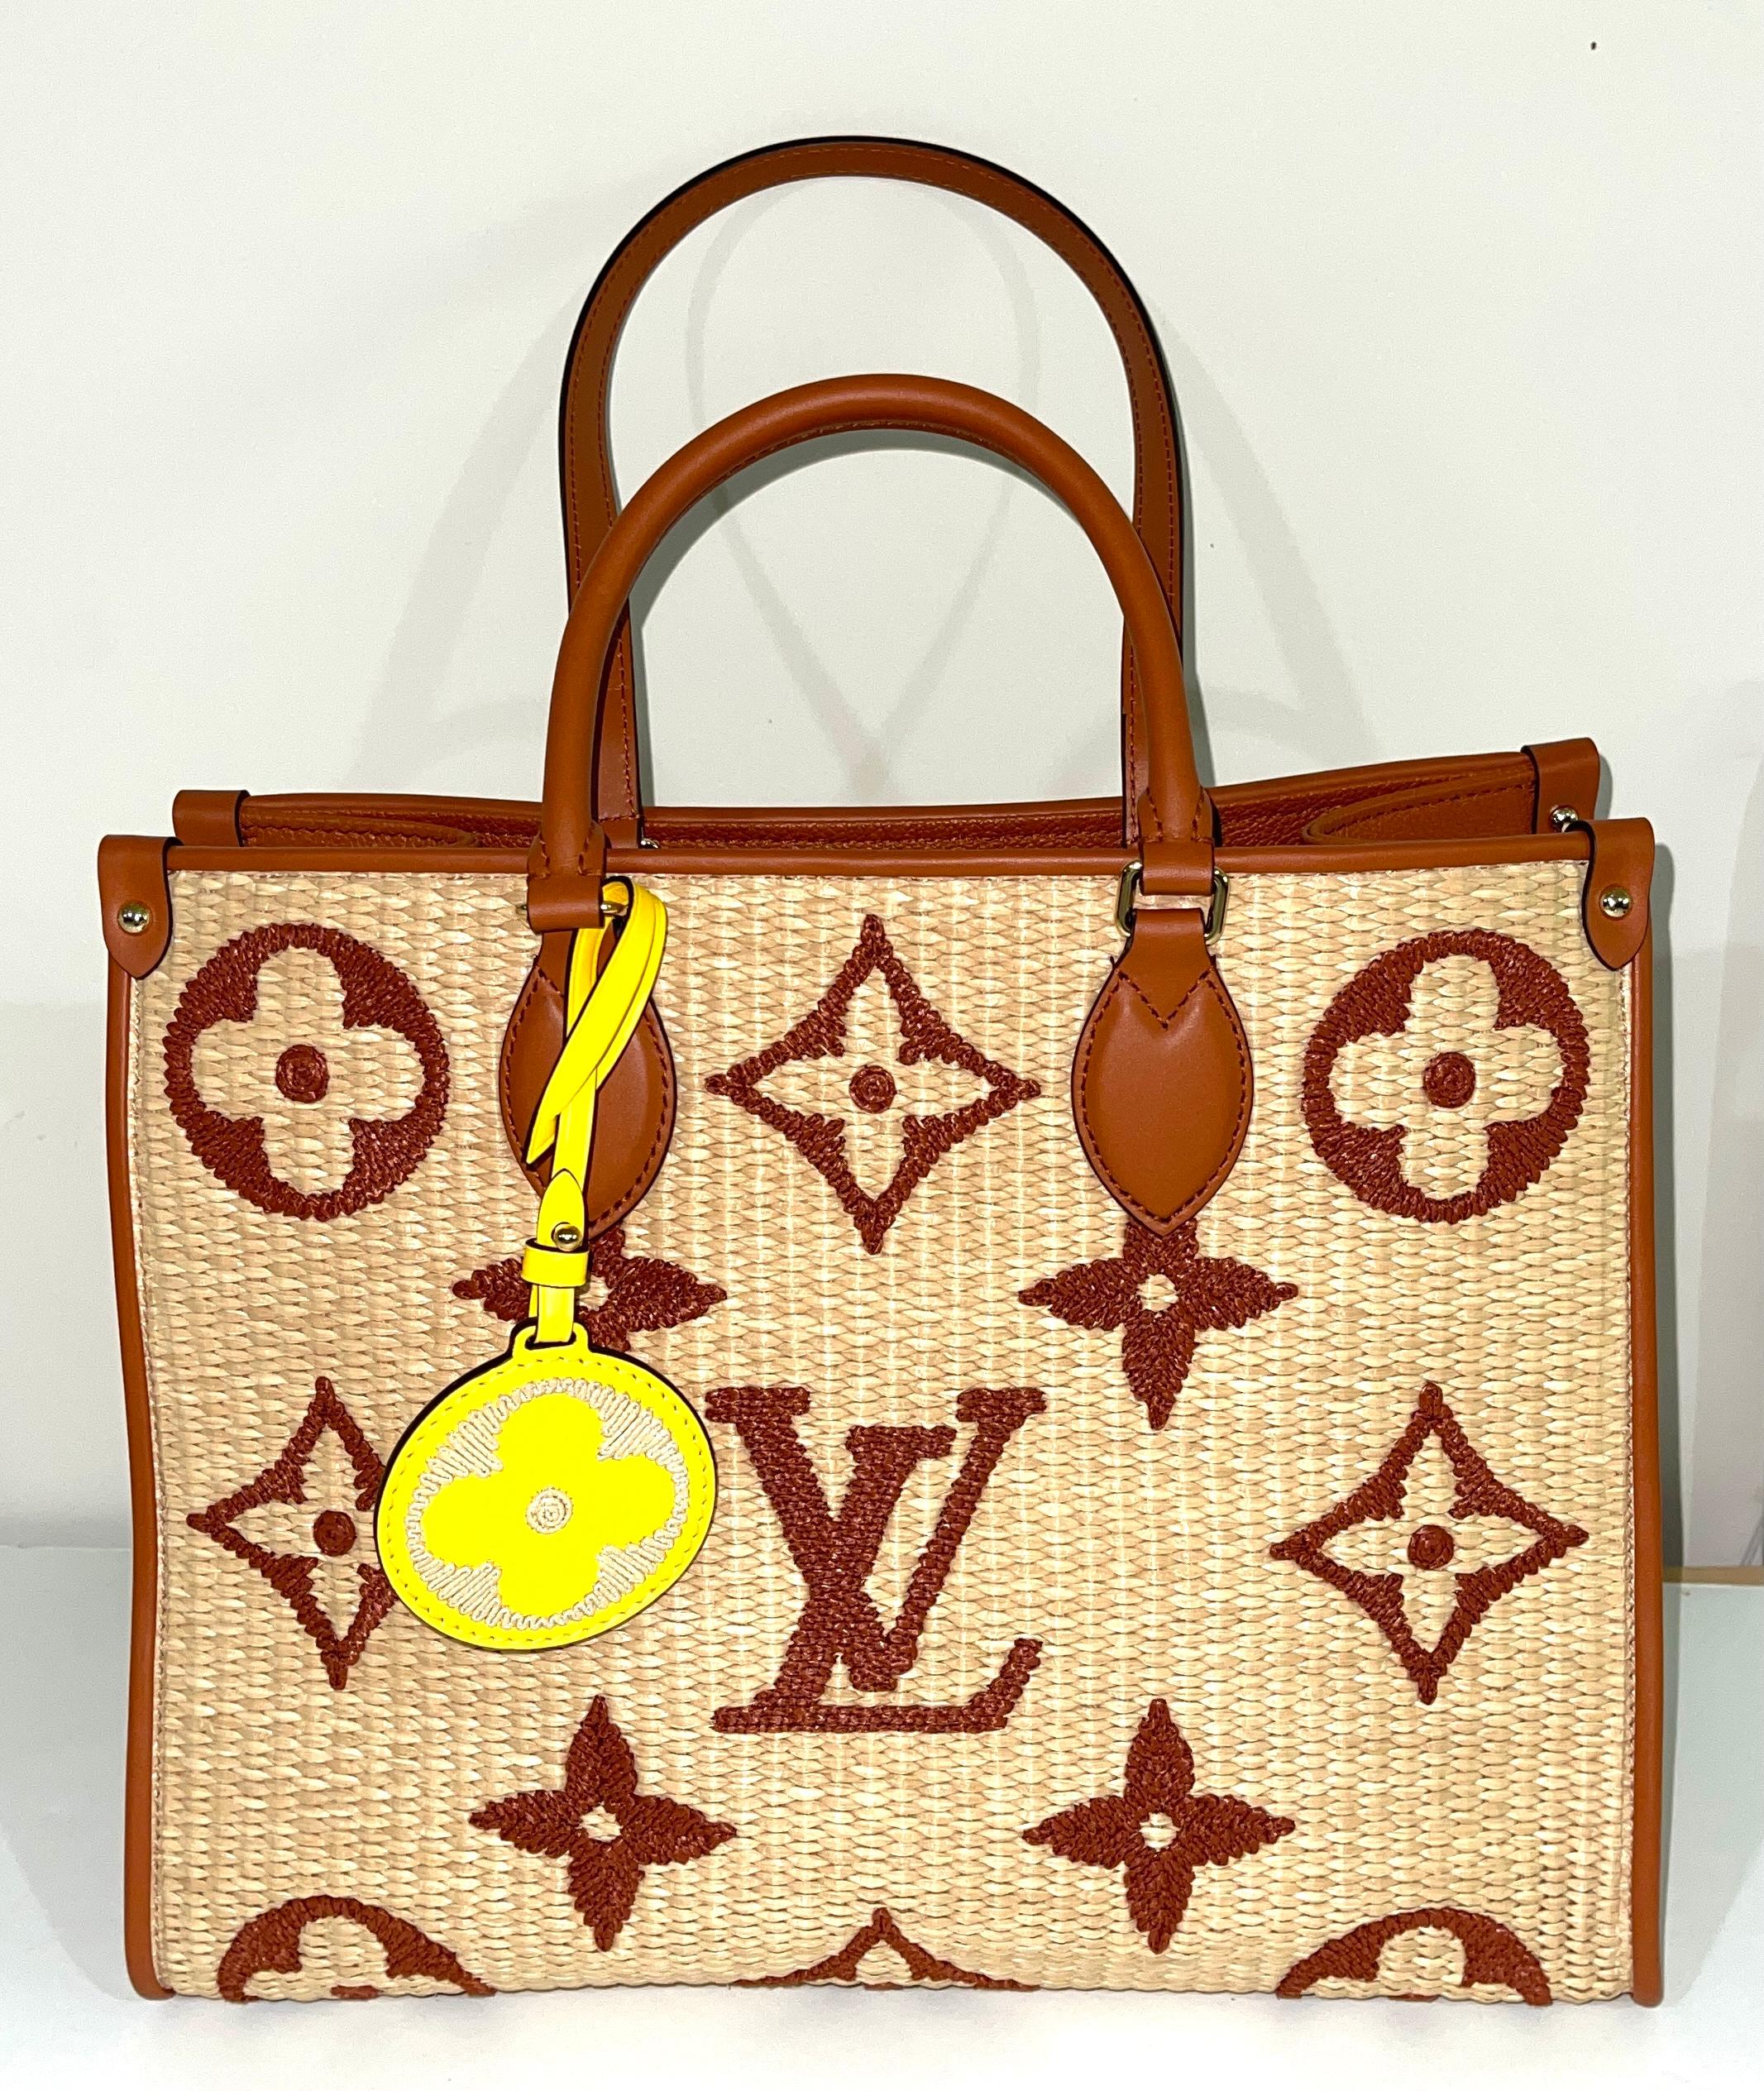 Authentic Louis Vuitton OnTheGo MM Bag for Sale in Santa Monica